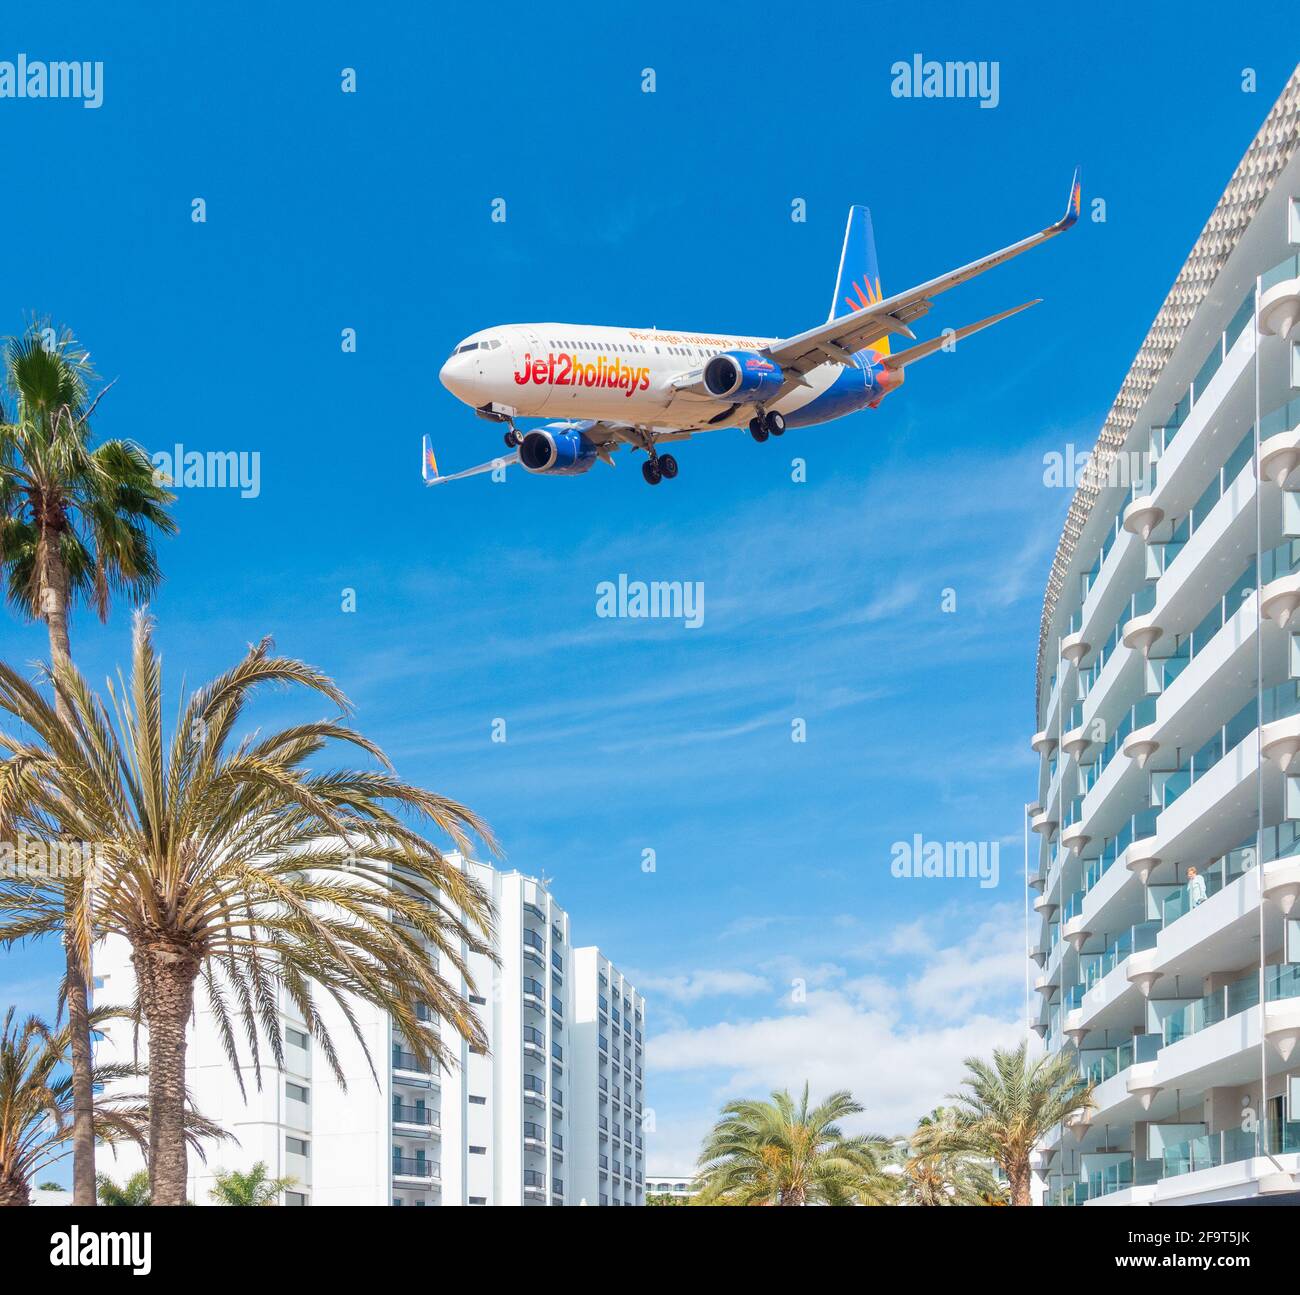 Jet 2.com airplane, aircraft flying over hotel in Spain. Composite image. Stock Photo